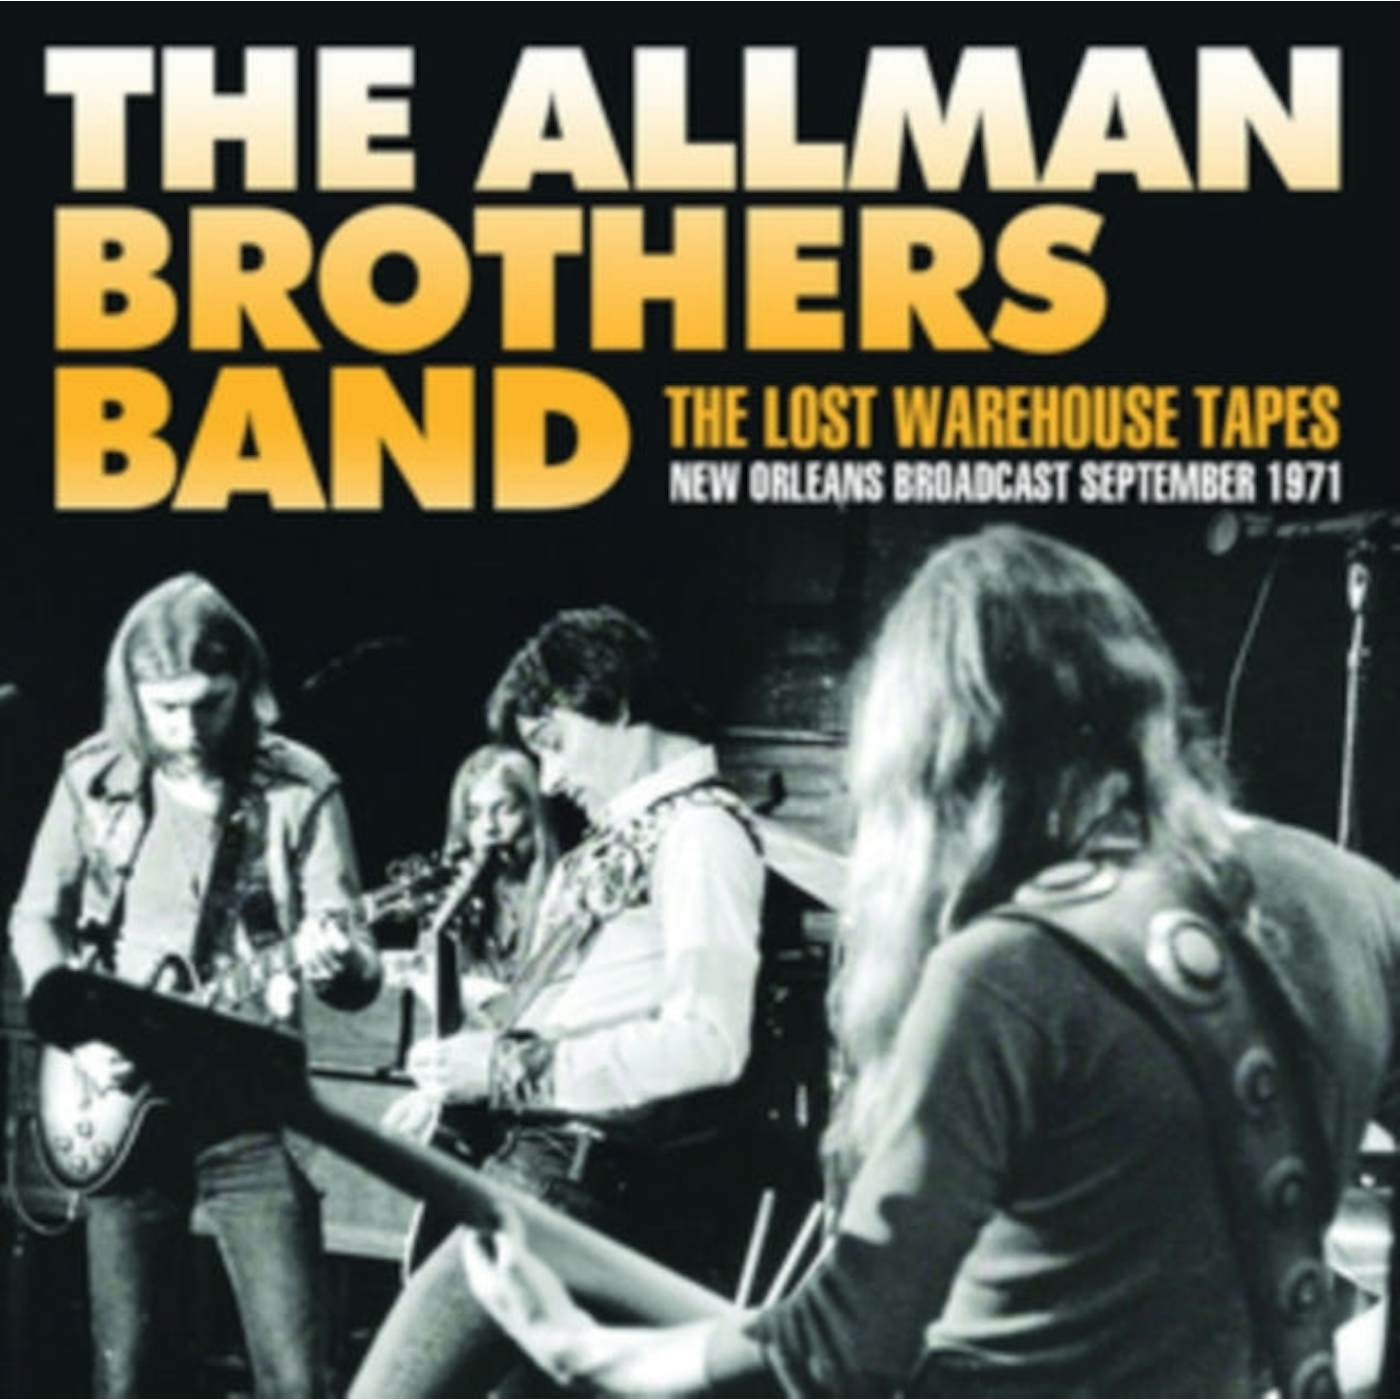 The Allman Brothers Band CD - The Lost Warehouse Tapes